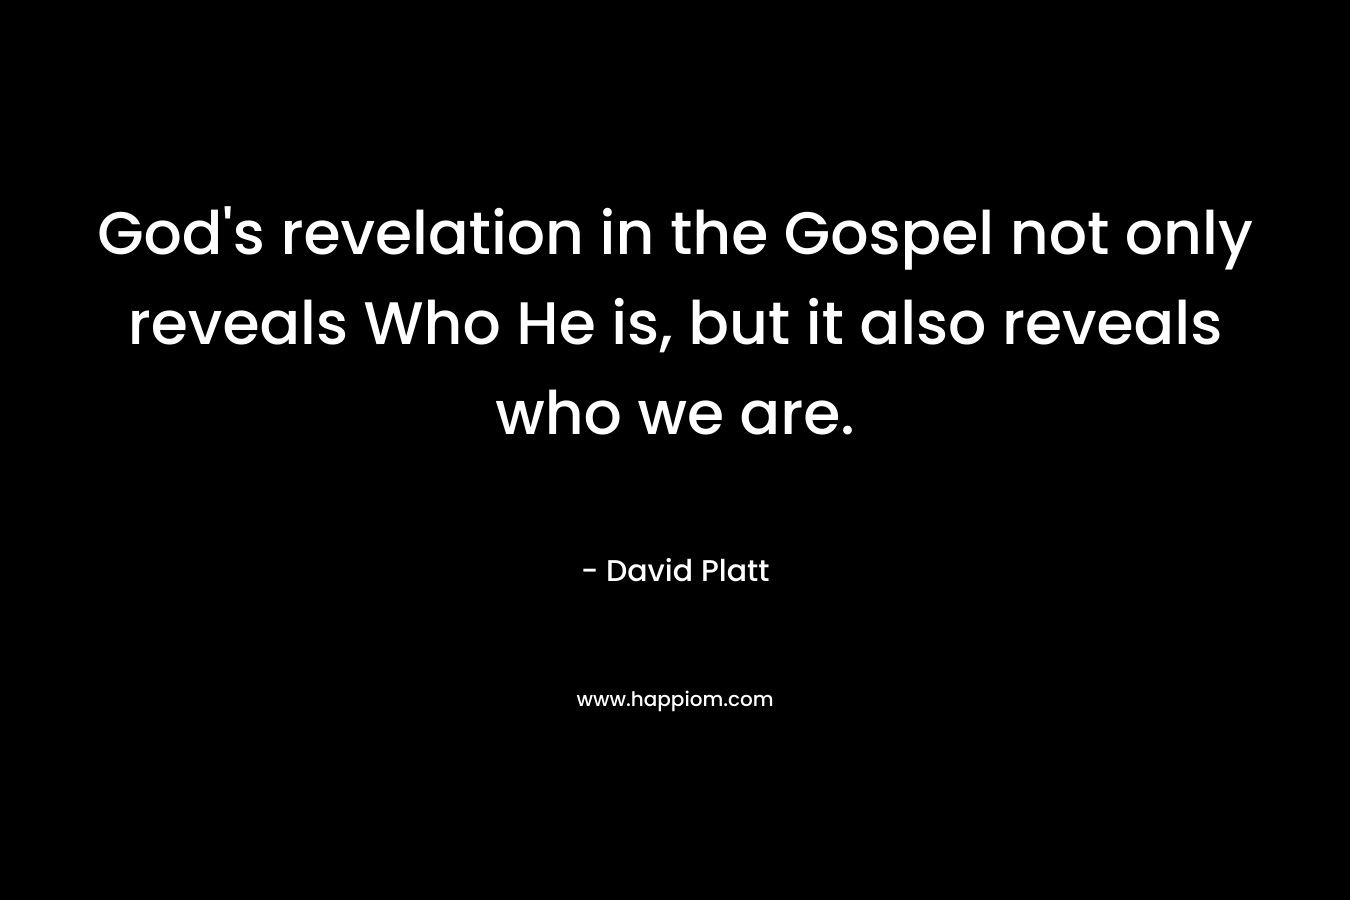 God's revelation in the Gospel not only reveals Who He is, but it also reveals who we are.